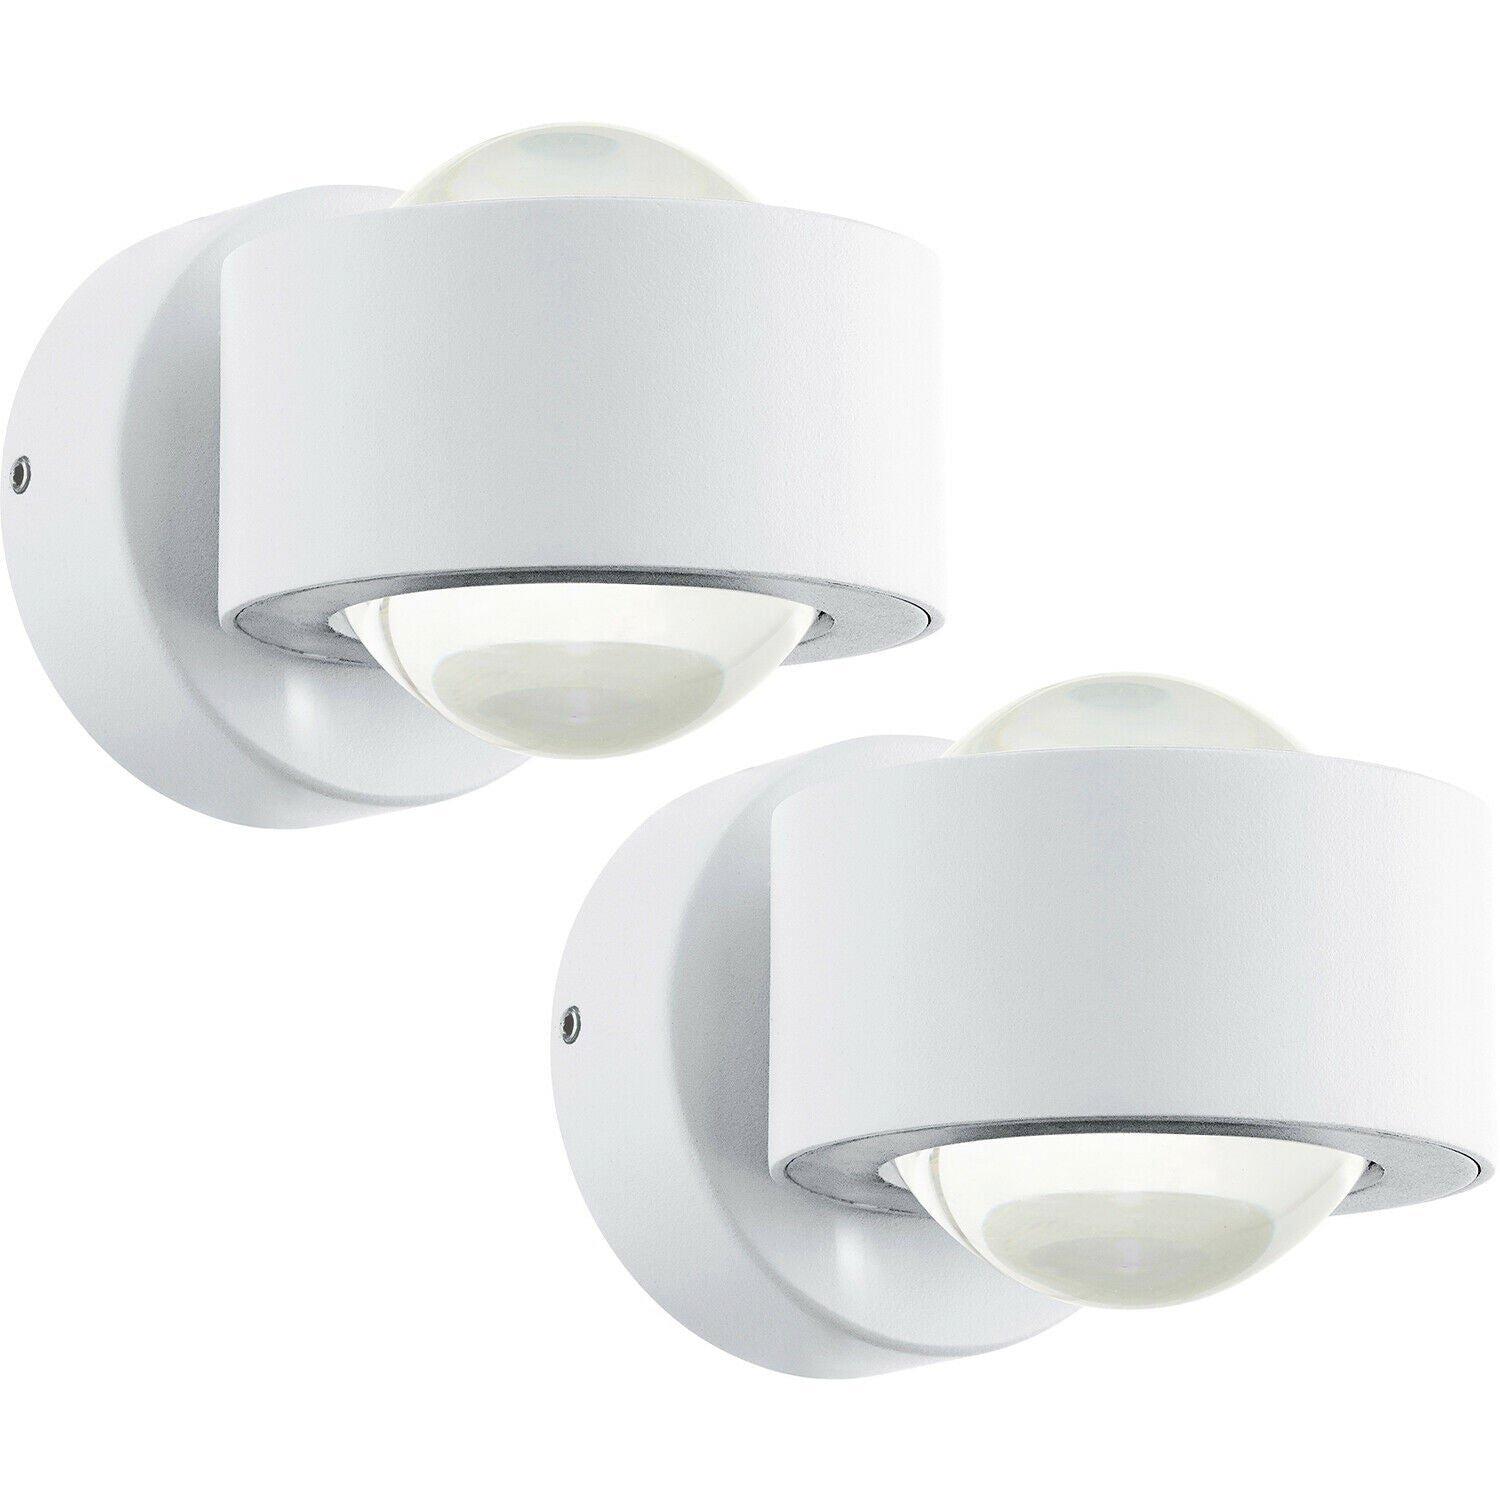 2 PACK Wall Light Colour White Aluminium Shade Clear Plastic LED 2.5W Included